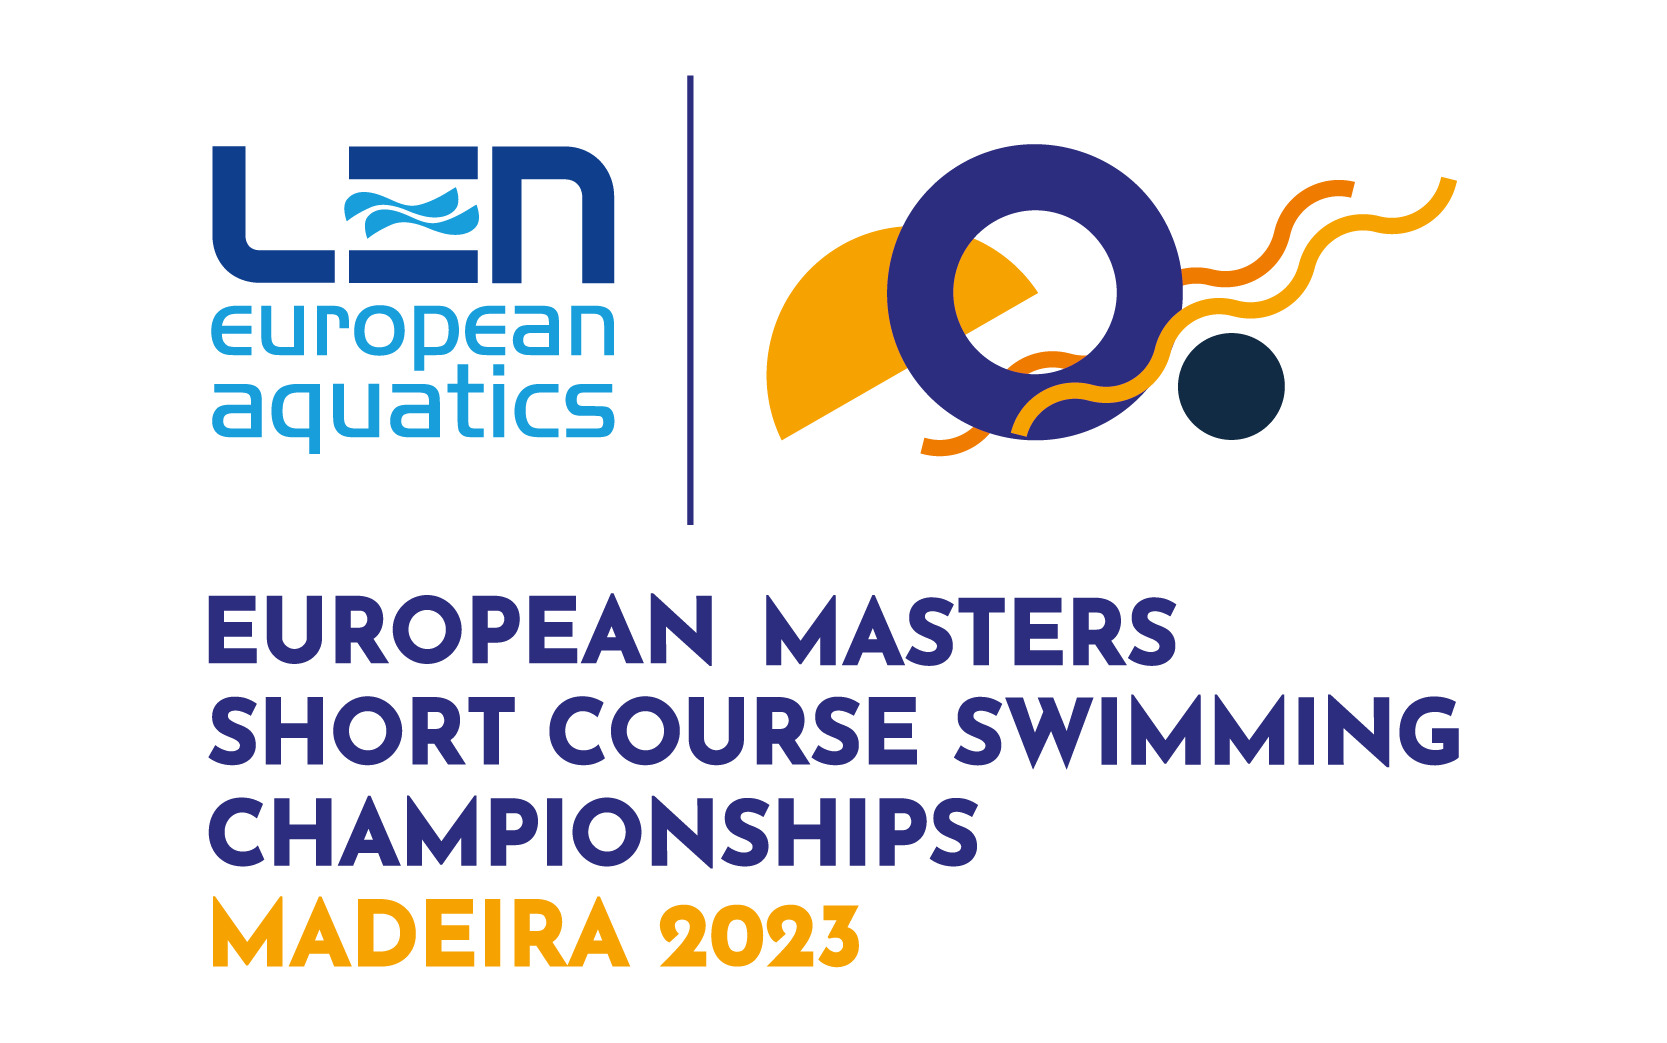 Belgian delegation published for the 2023 European Swimming Short Course and Open Water Masters Championships